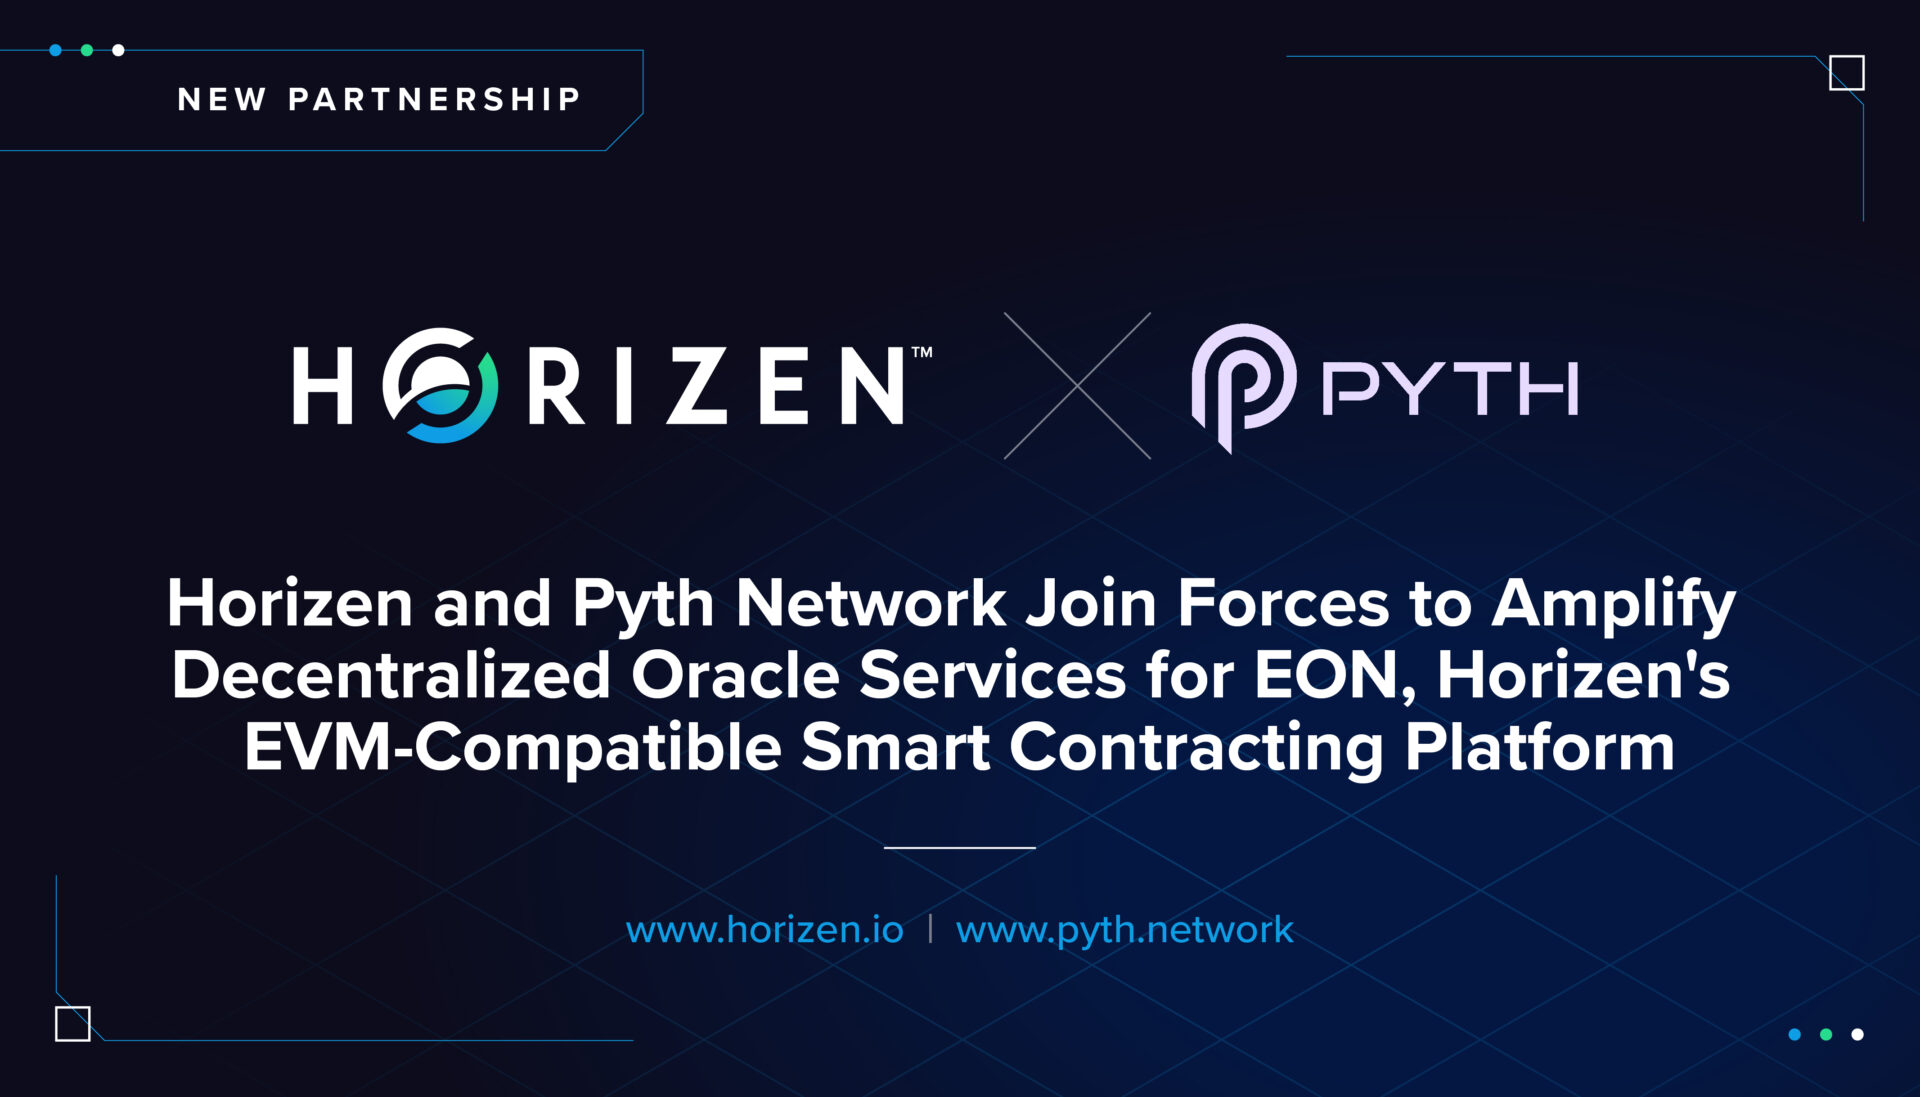 Horizen and Pyth partners